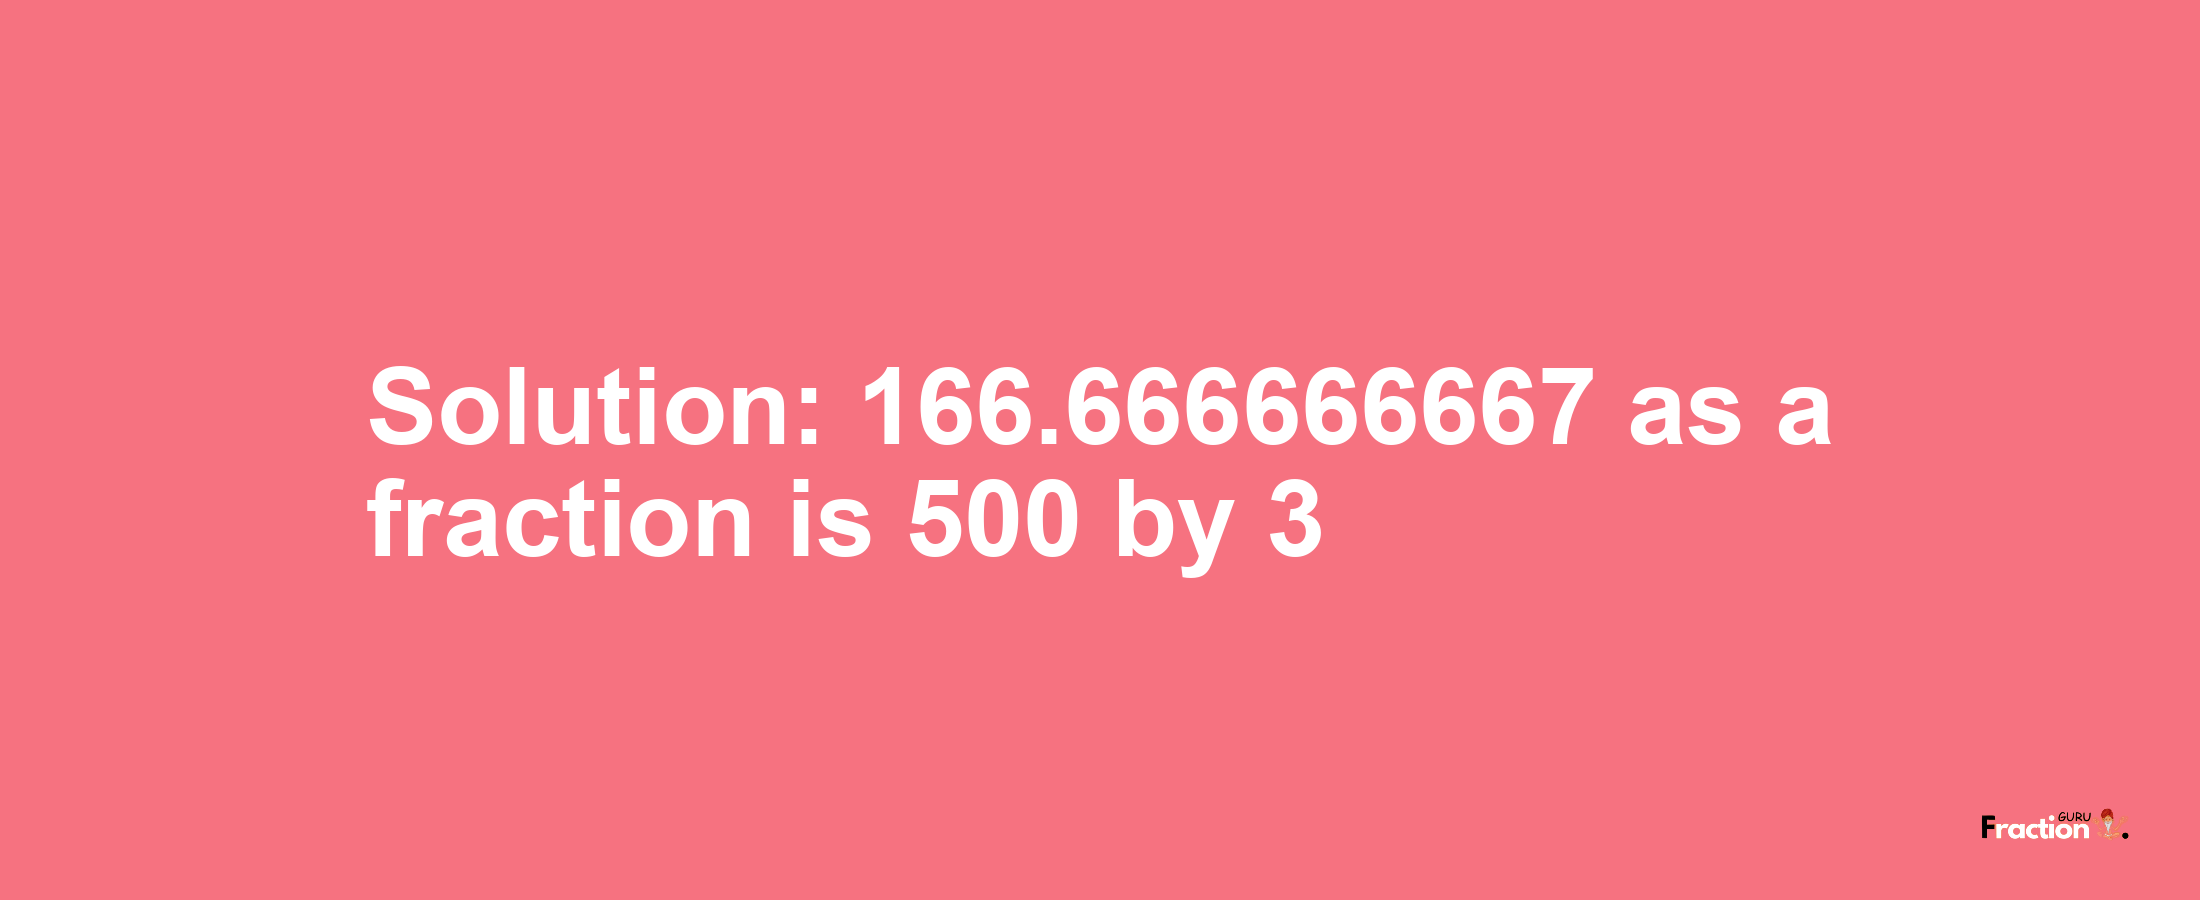 Solution:166.666666667 as a fraction is 500/3